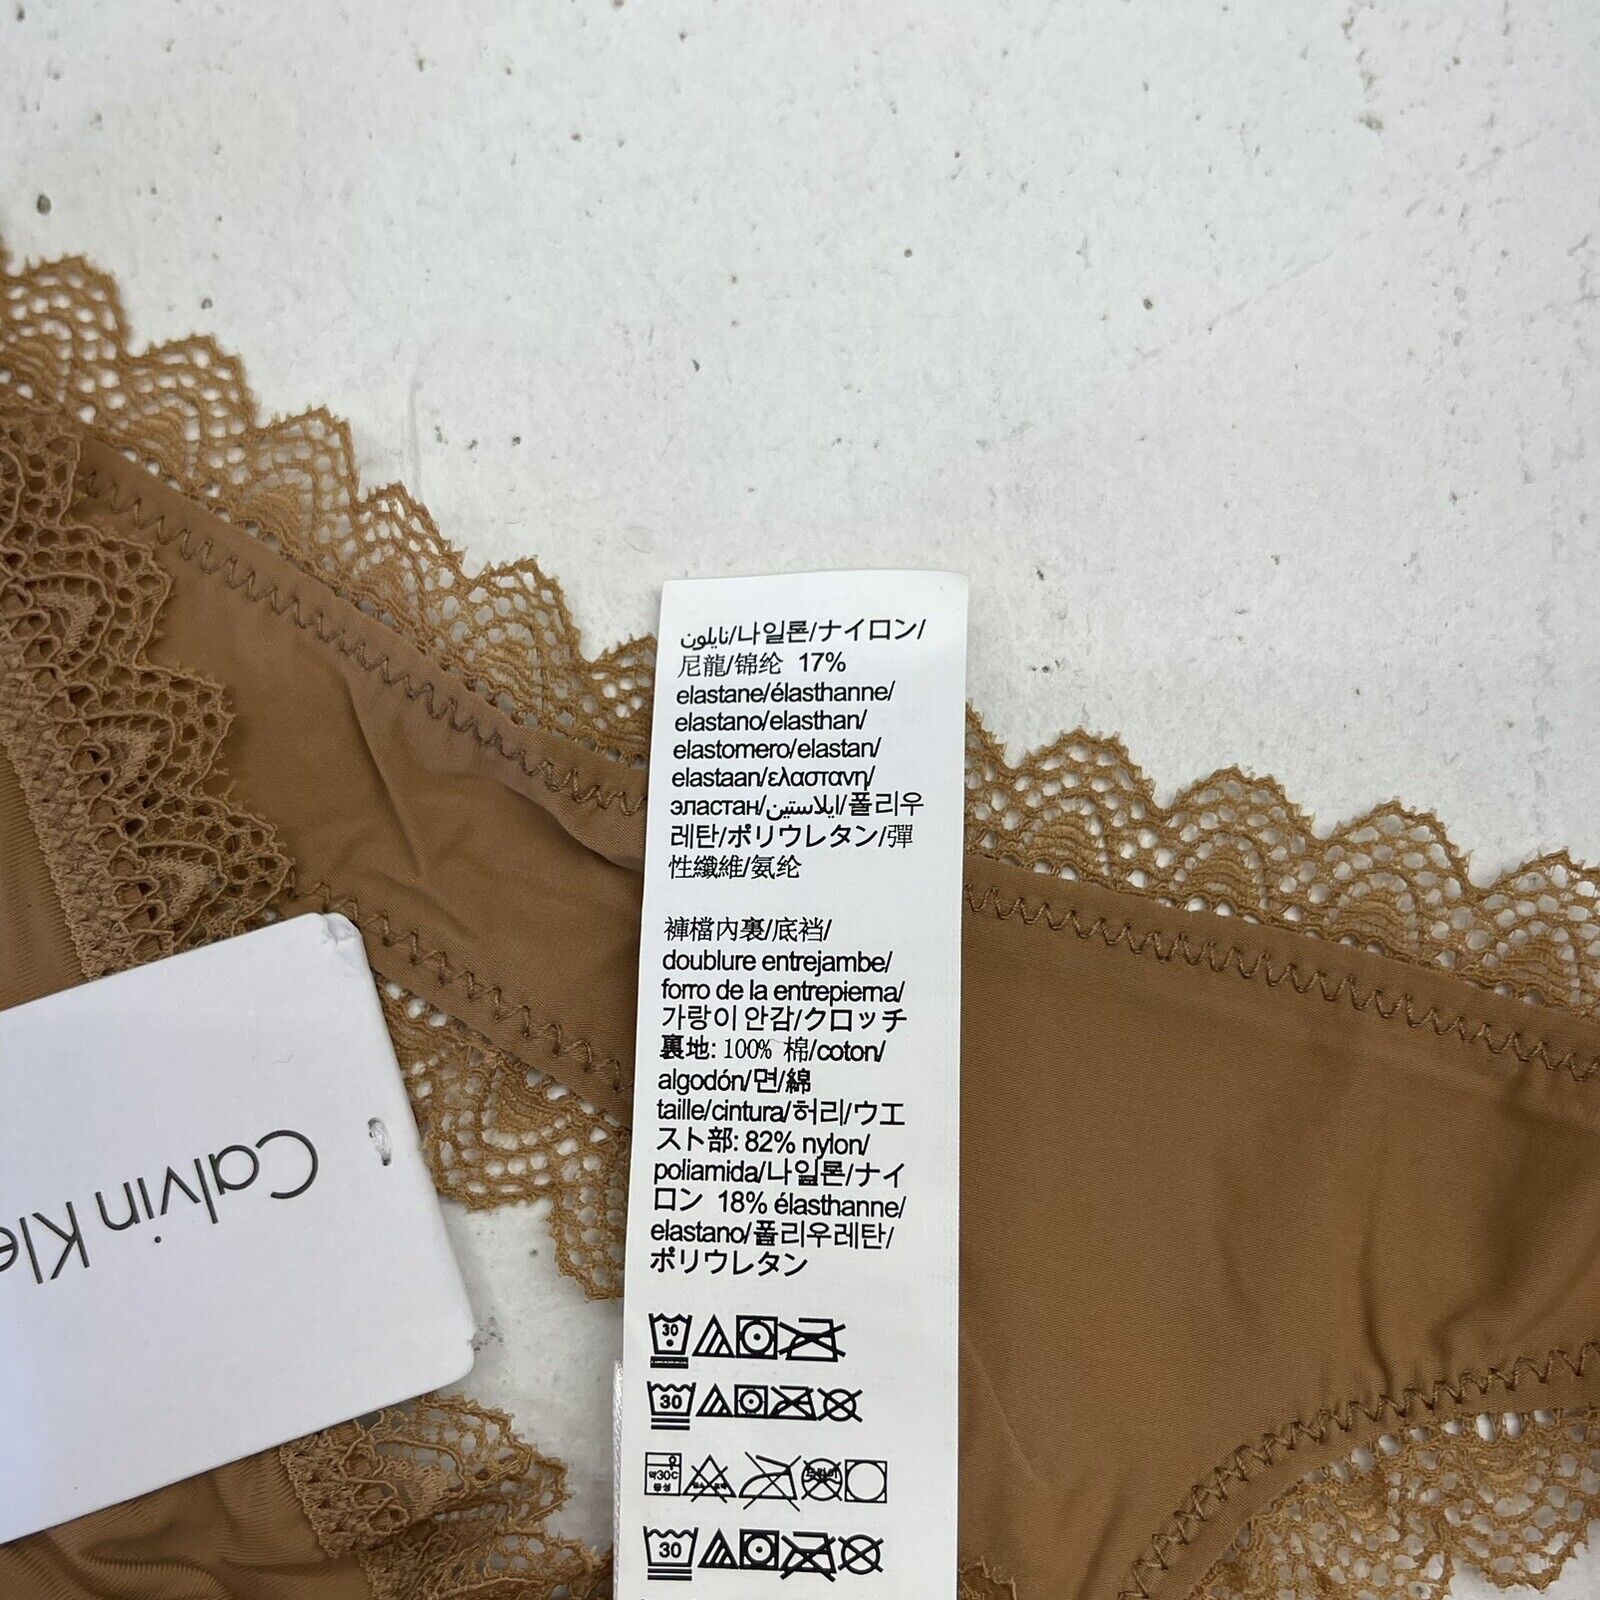 Calvin Klein Beige Lace Trim Thong Women's Size Small New - beyond